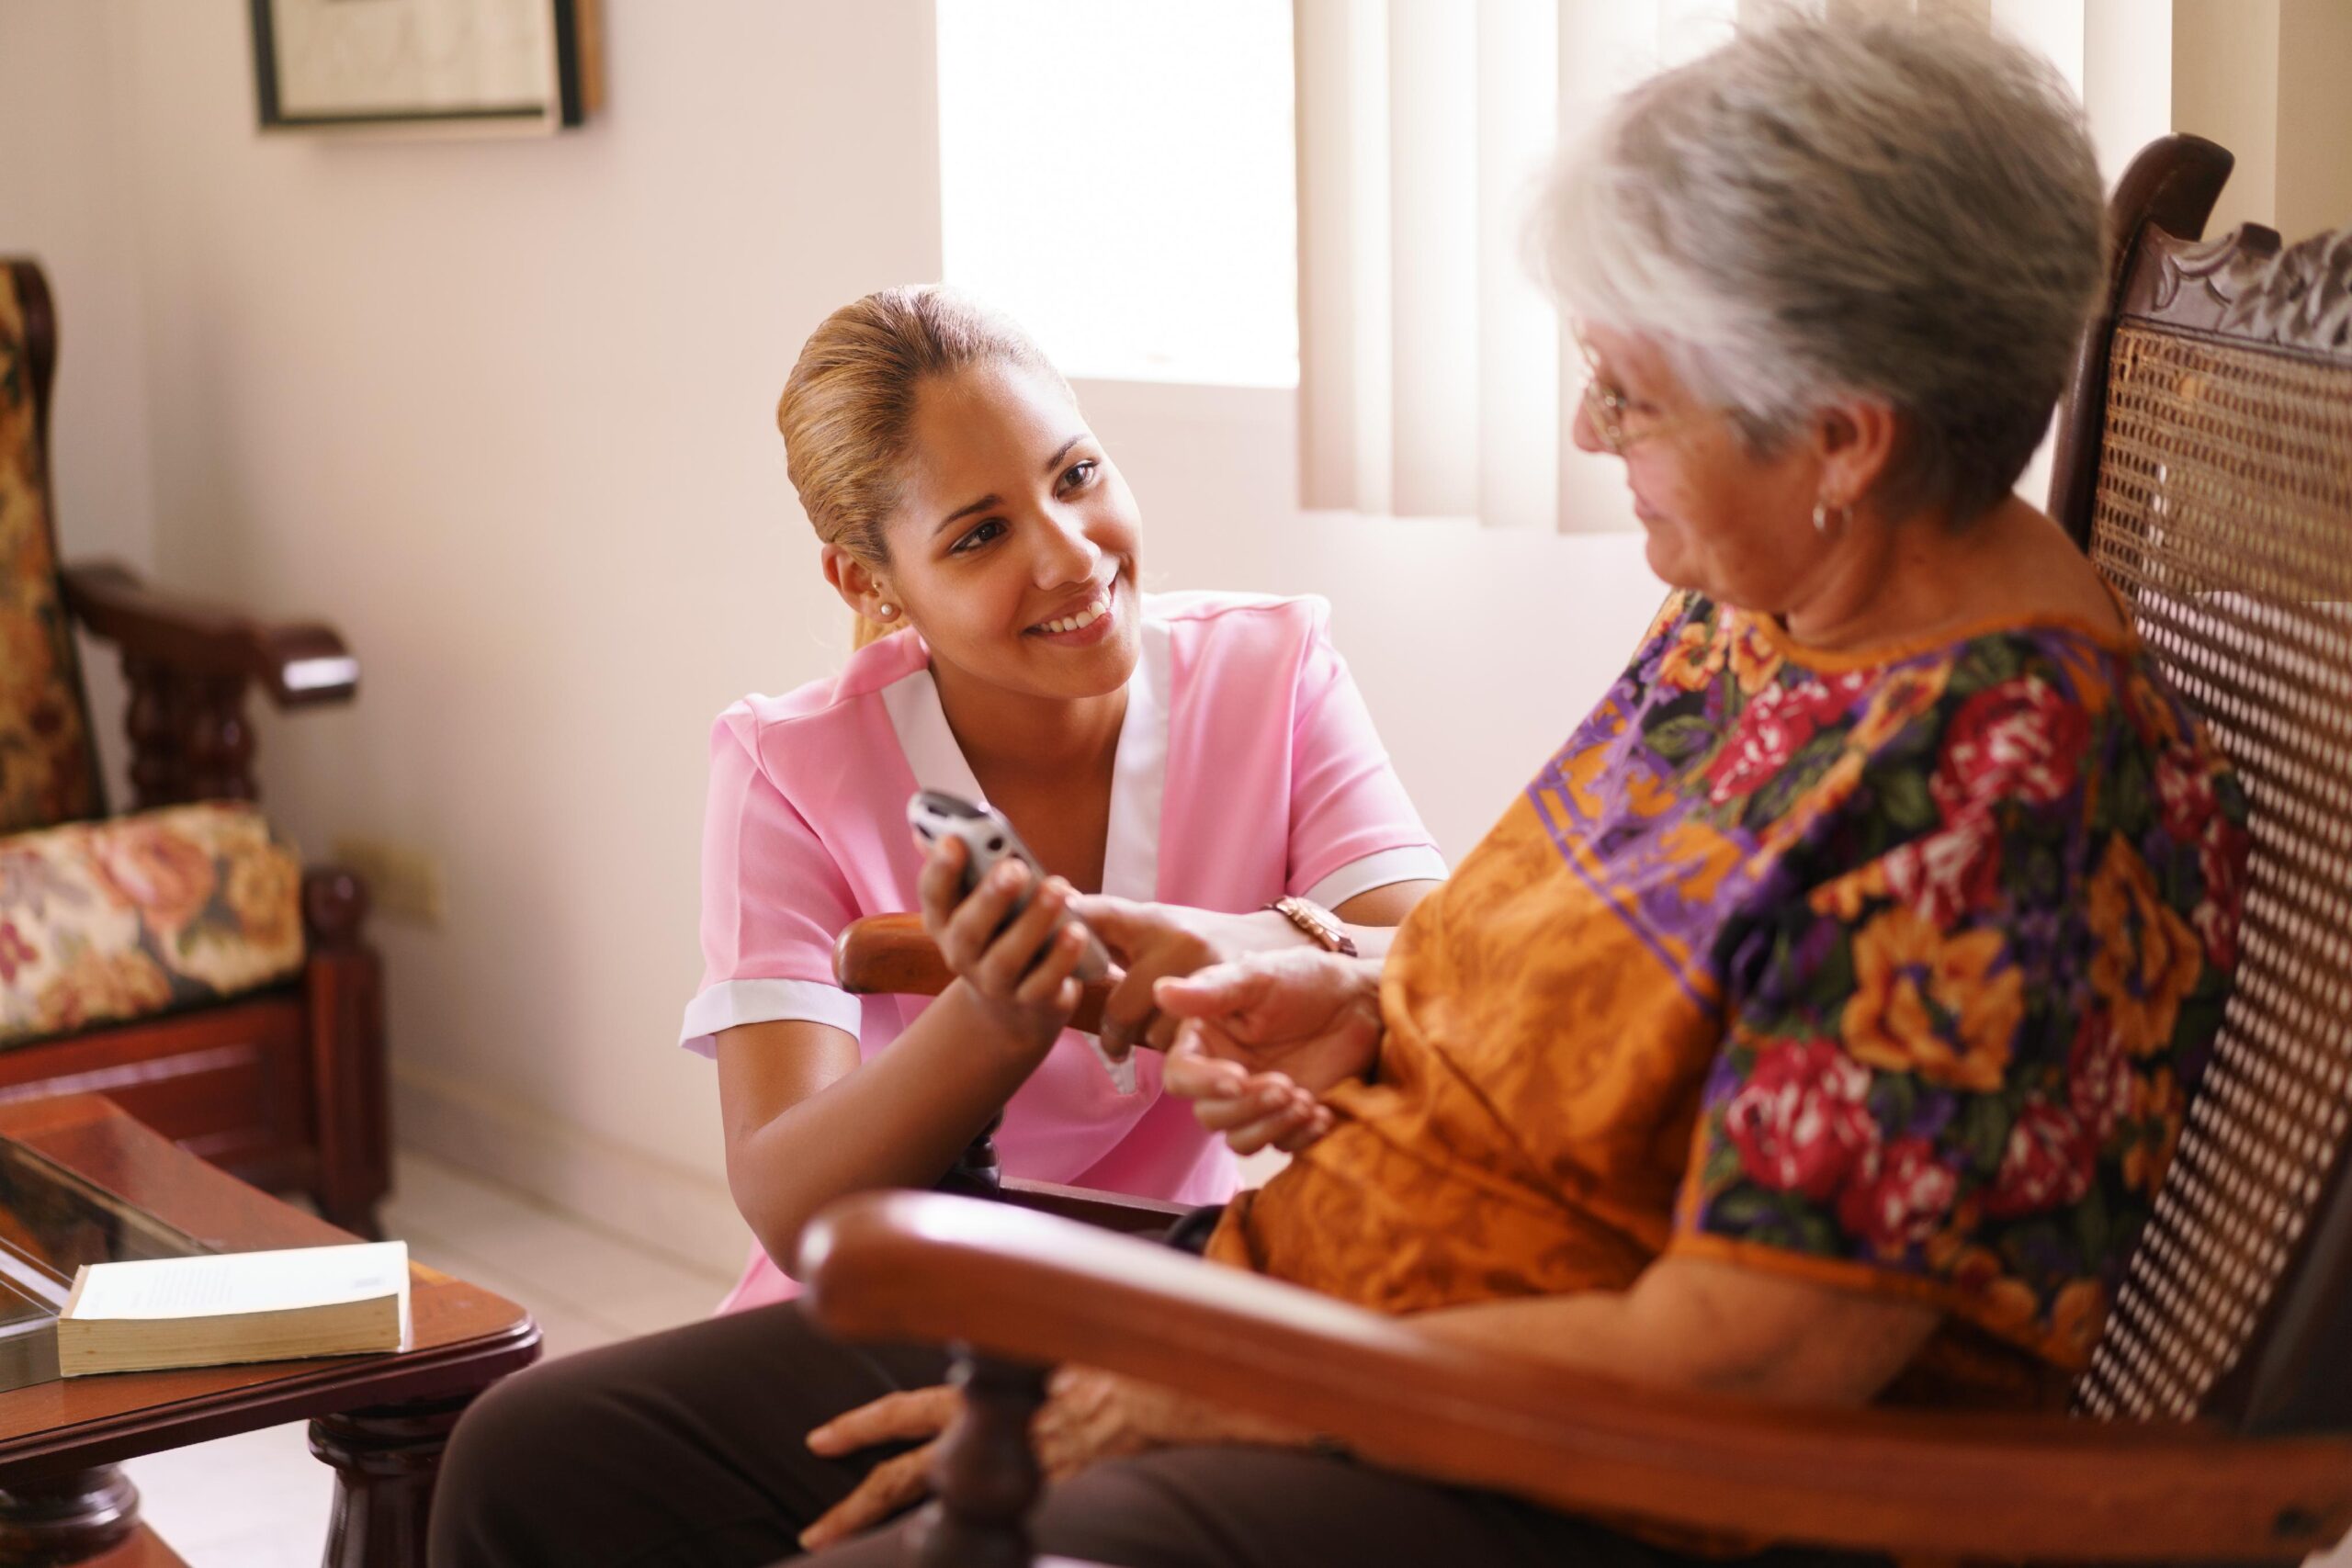 Home Care Aid Part 1: Addressing the Challenges